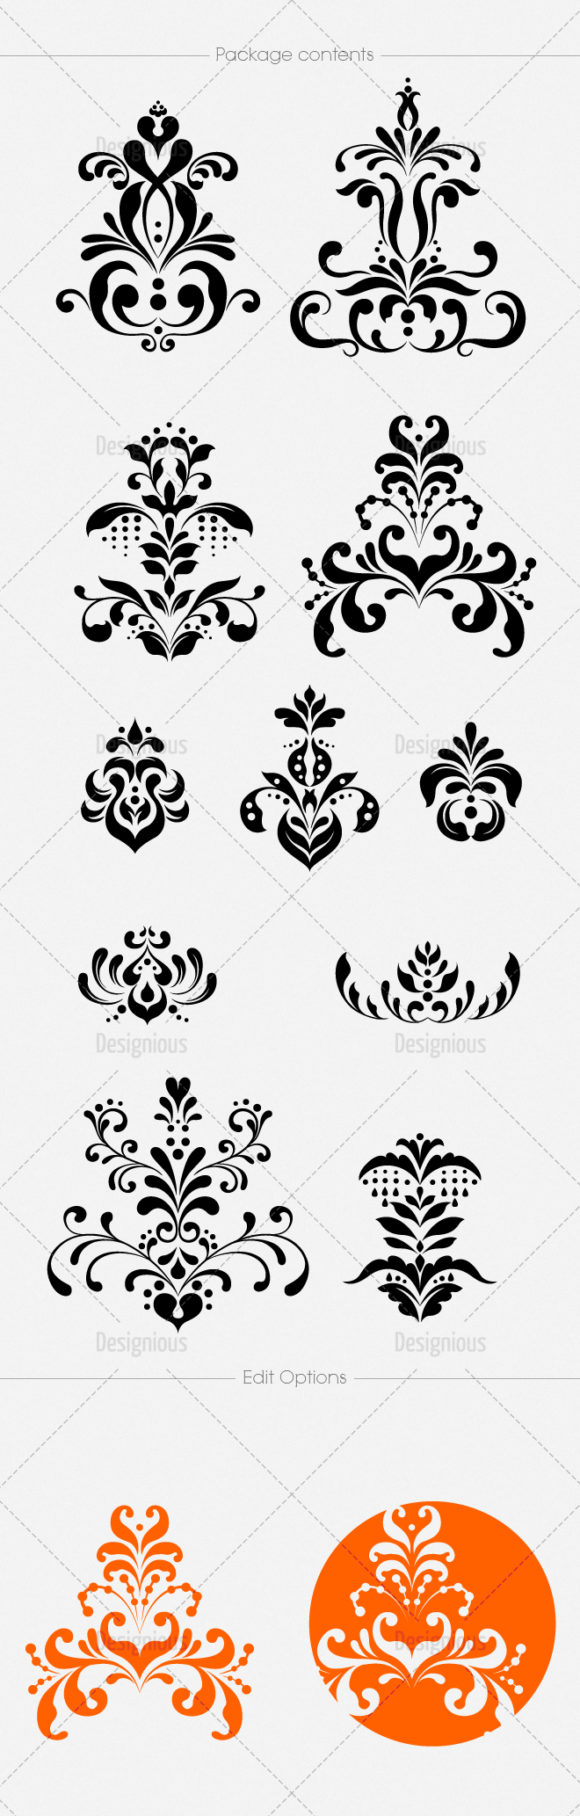 Floral Vector Pack 120 2